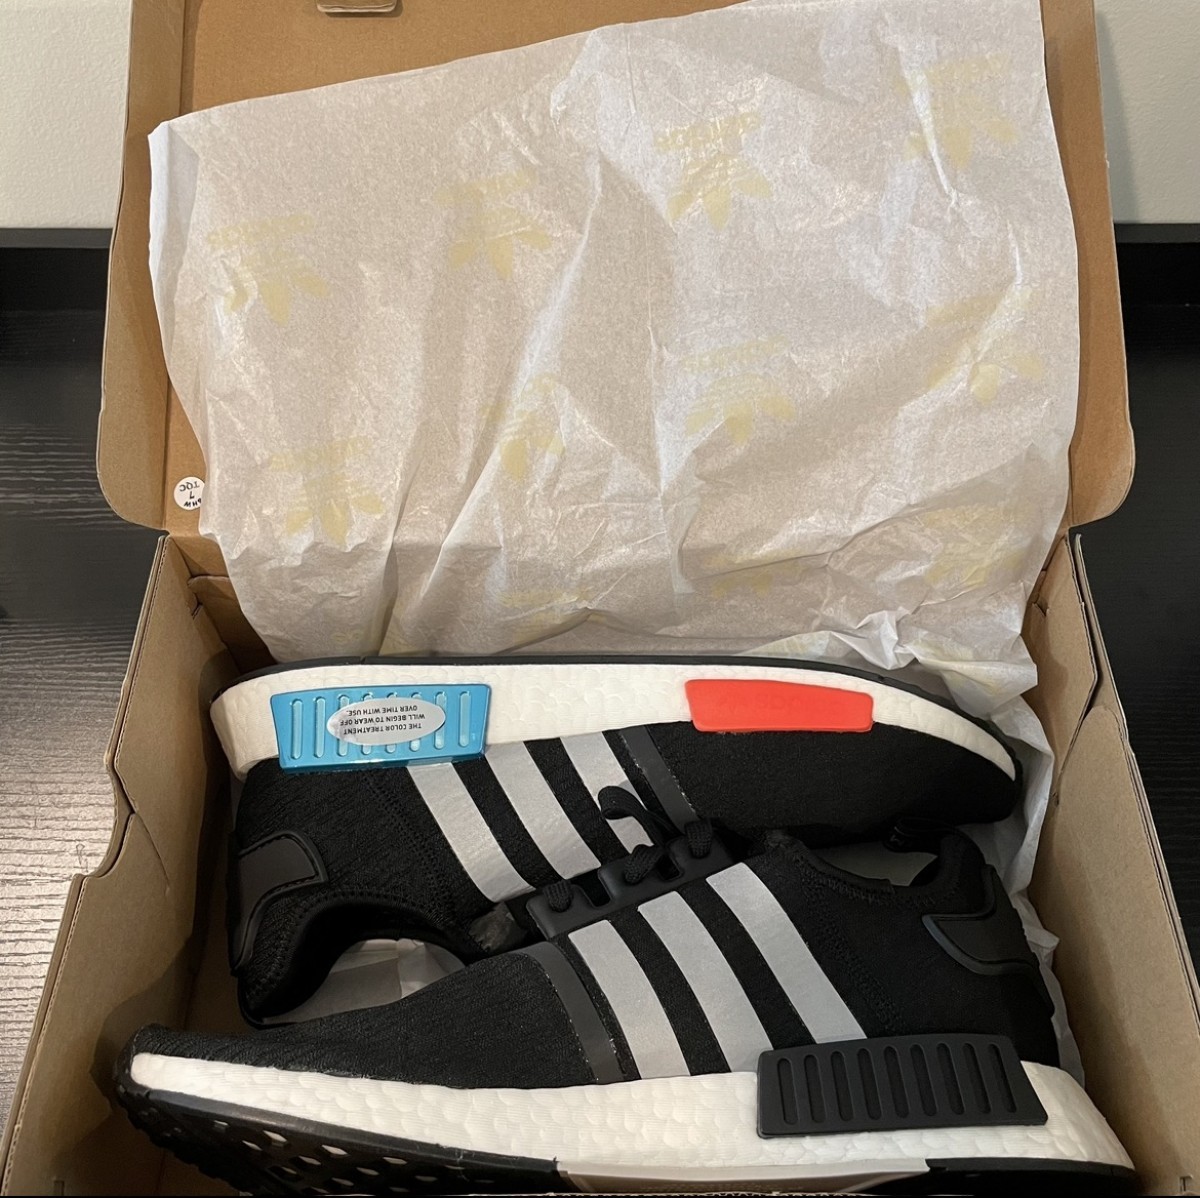 NMD R1 size 11 - 1